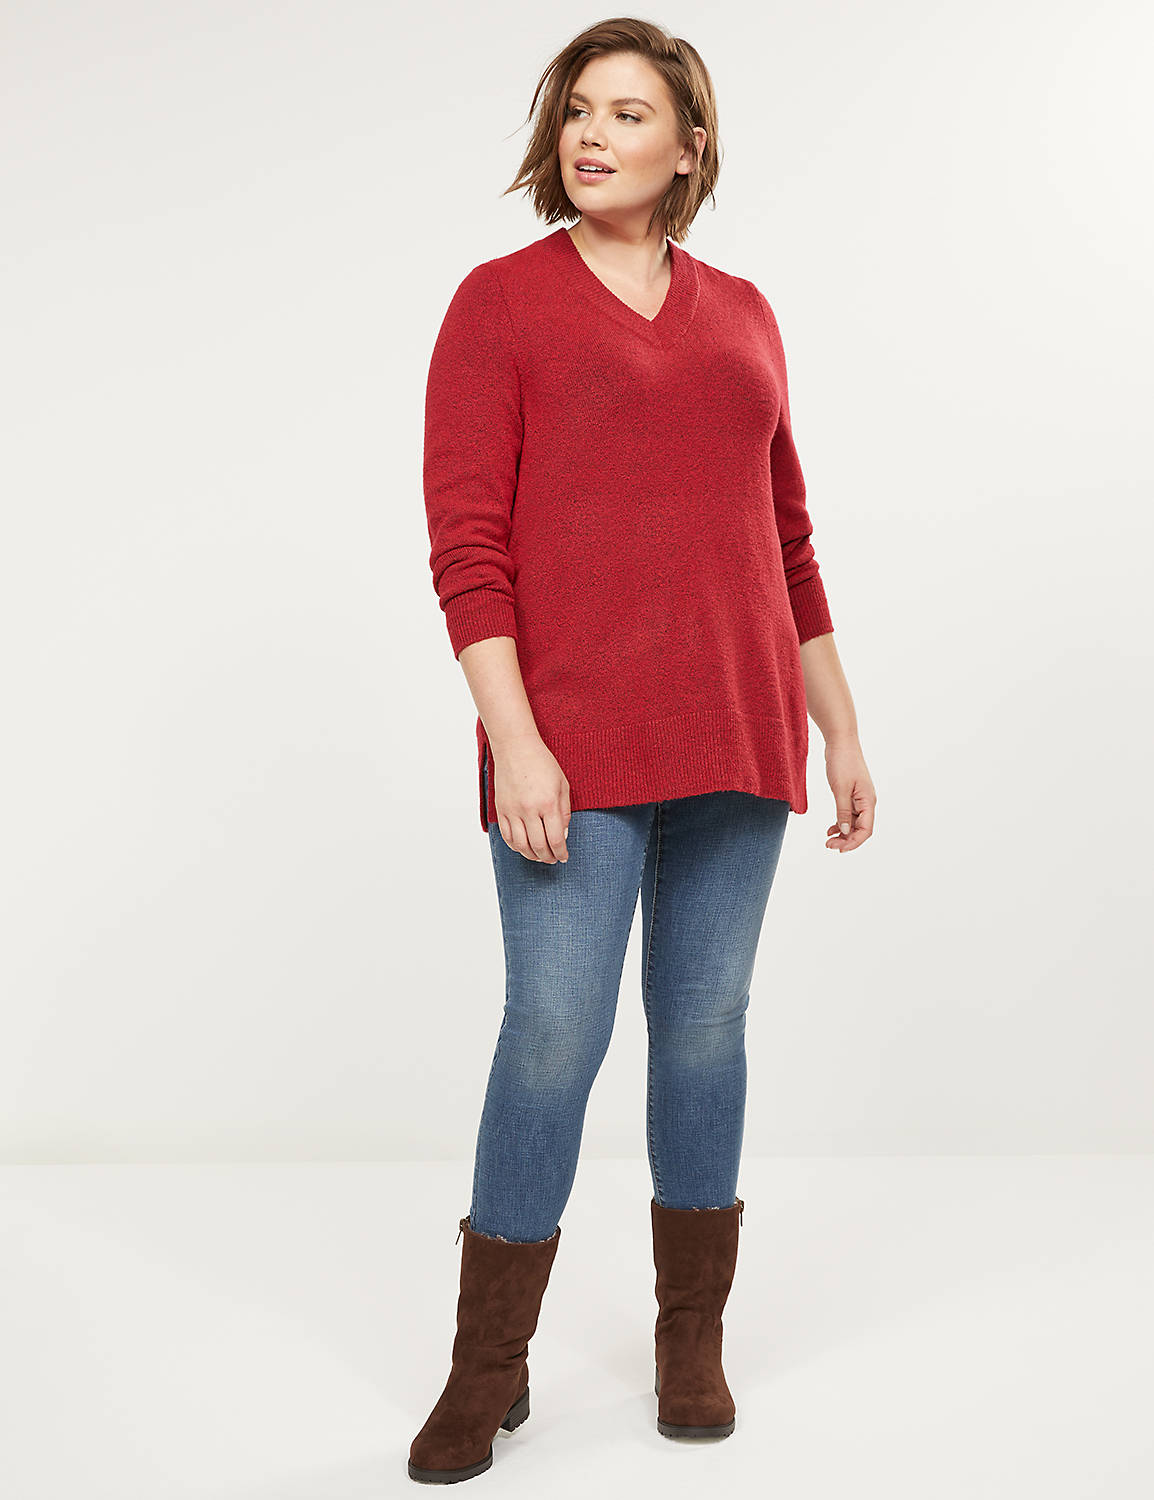 1108693 Pullover Vneck Sweater:Venetian Red CSI 0300944:22/24 Product Image 3